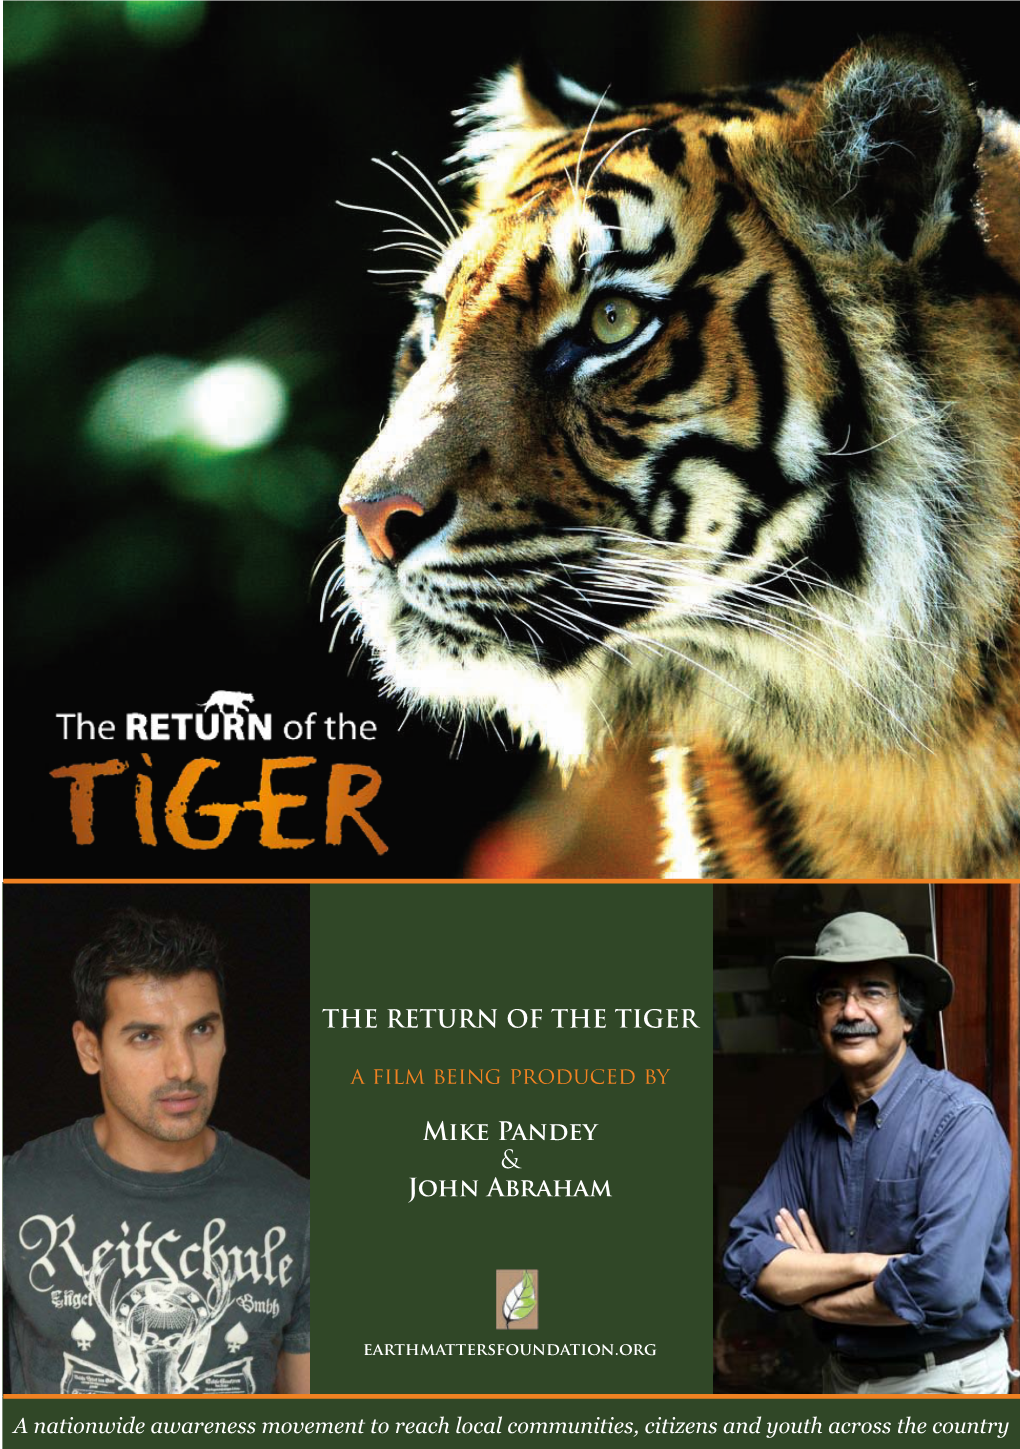 THE RETURN of the TIGER Mike Pandey & John Abraham